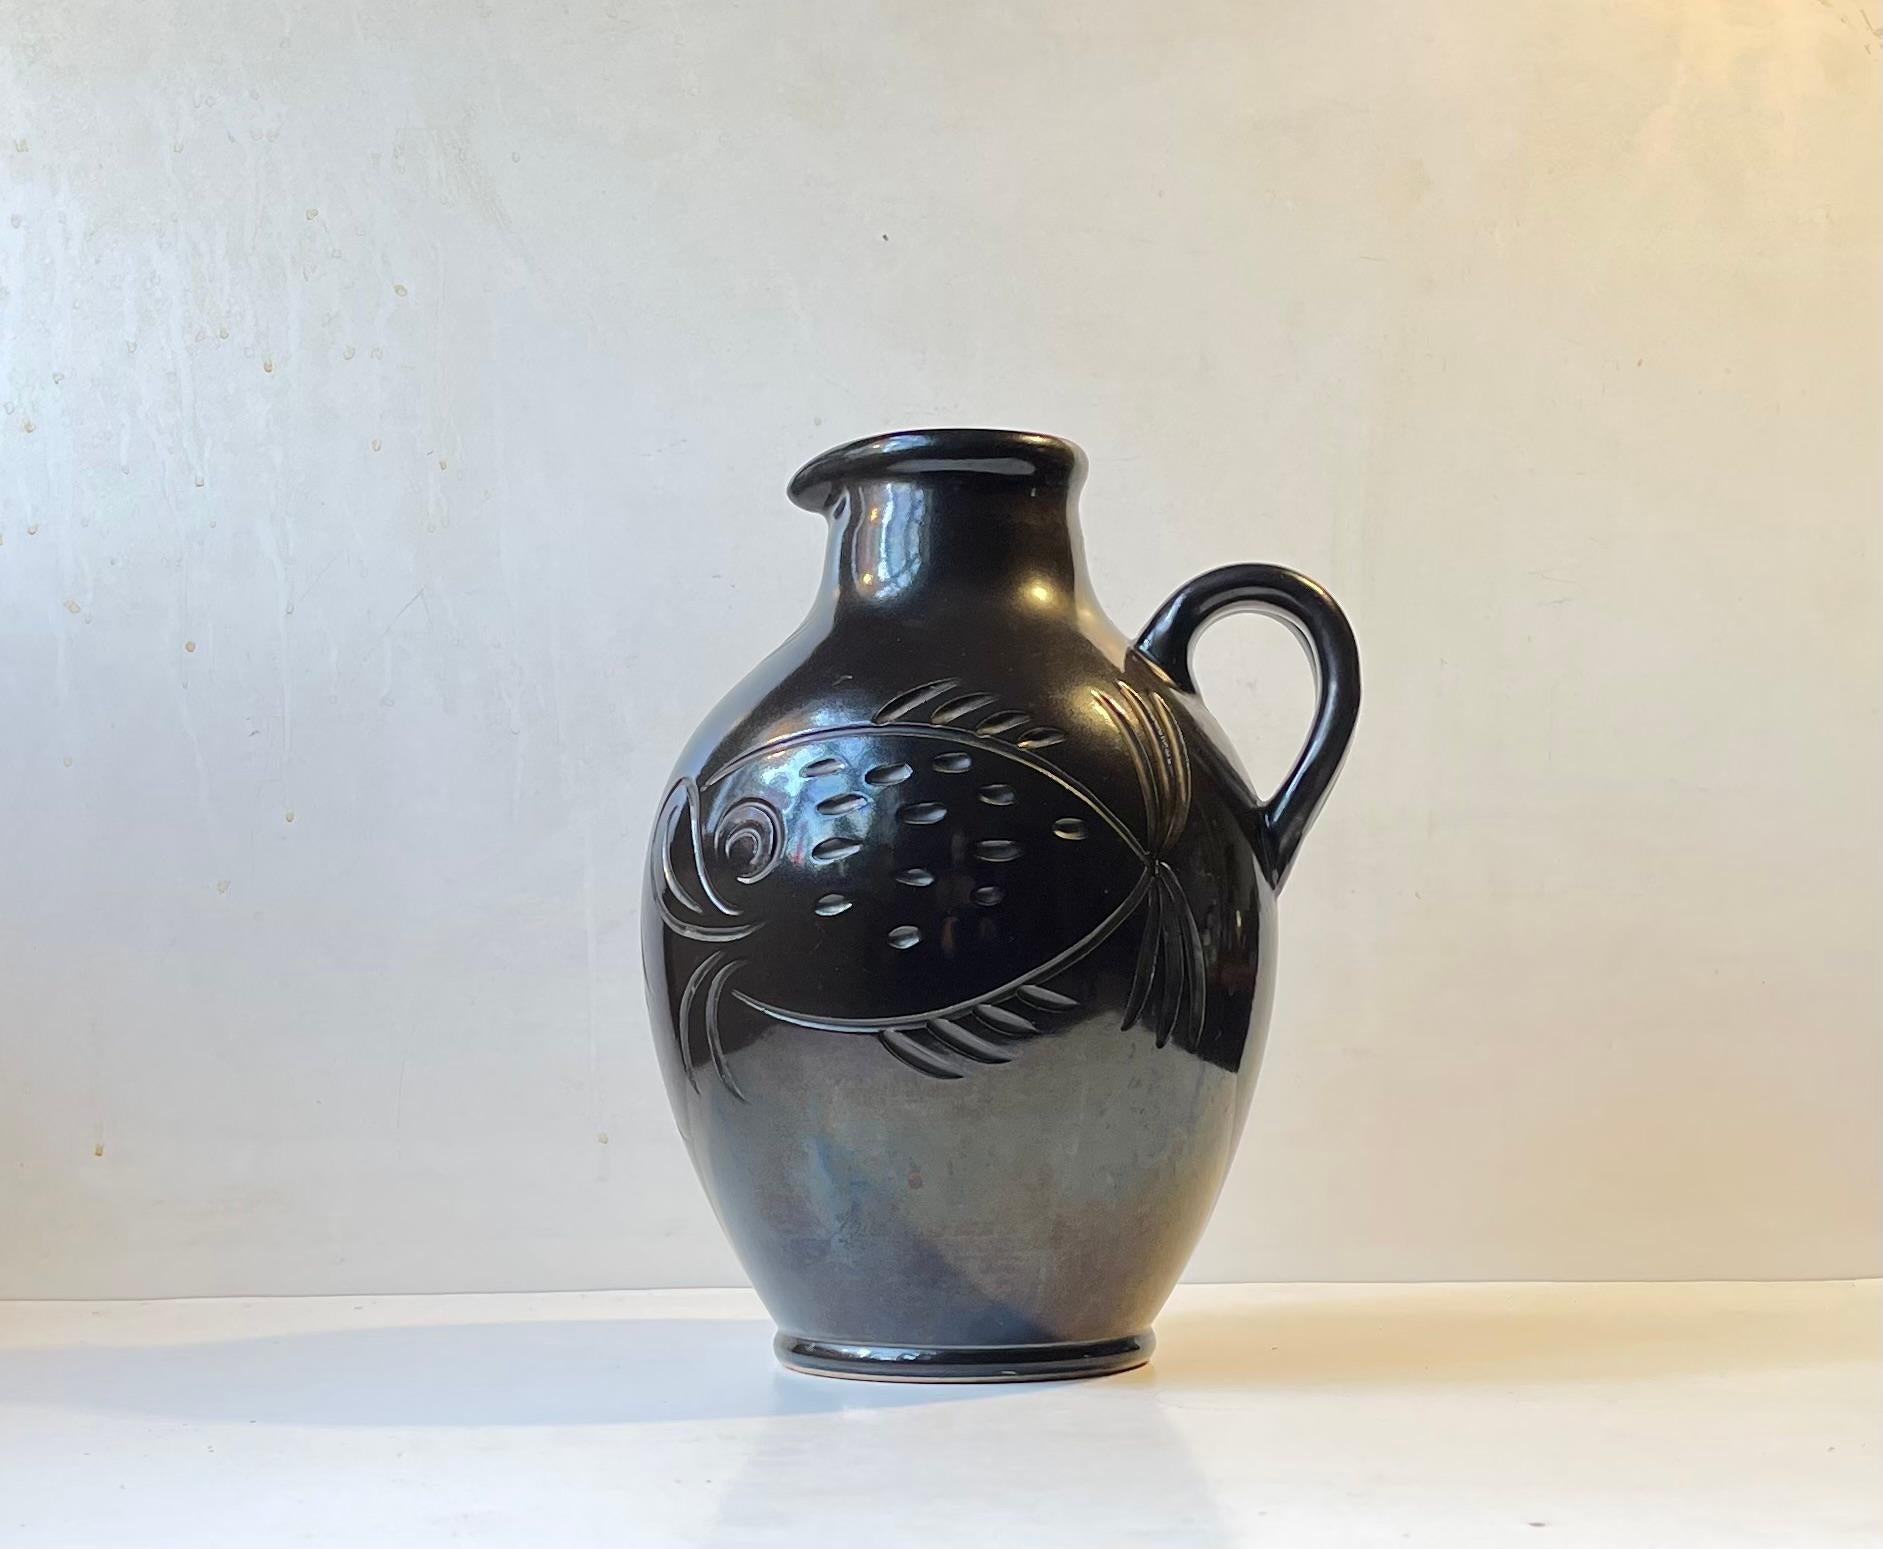 A very rare monumental jug-vase in black glaze with stylized incised fish motif. Numbered, signed and stamped with the monogram of MA&S to the bottom. Beautiful intact and clean vintage condition. Measurements: H: 29 cm, D: 20 cm.